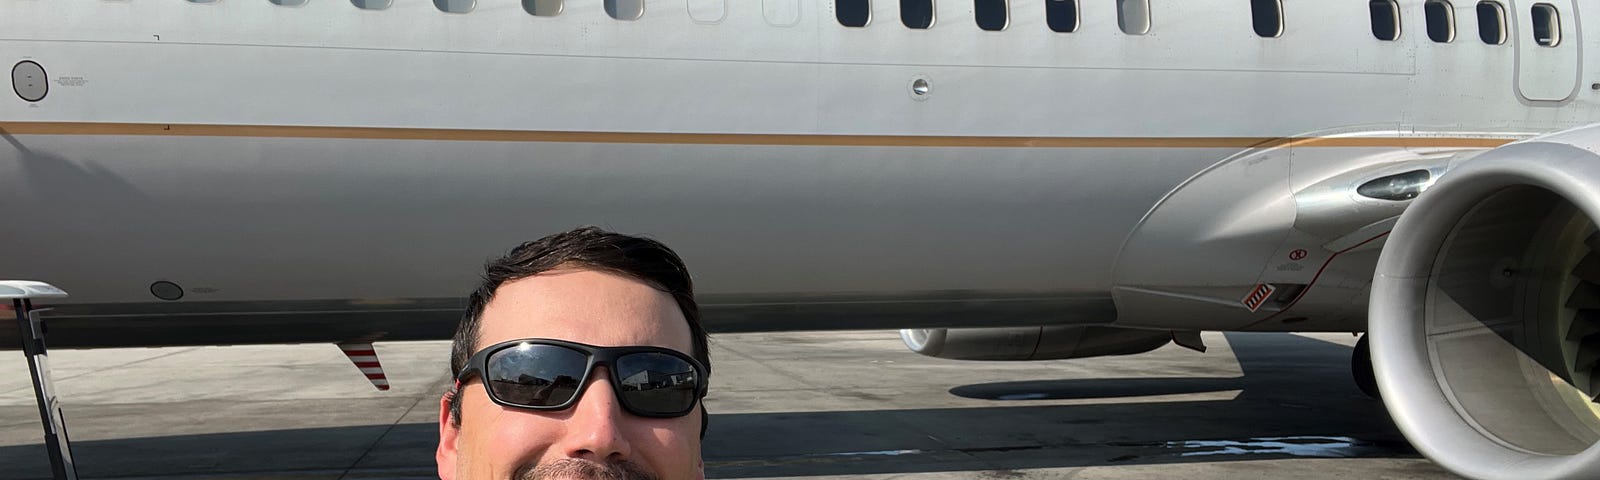 Alex posing with United aircraft on the runway.